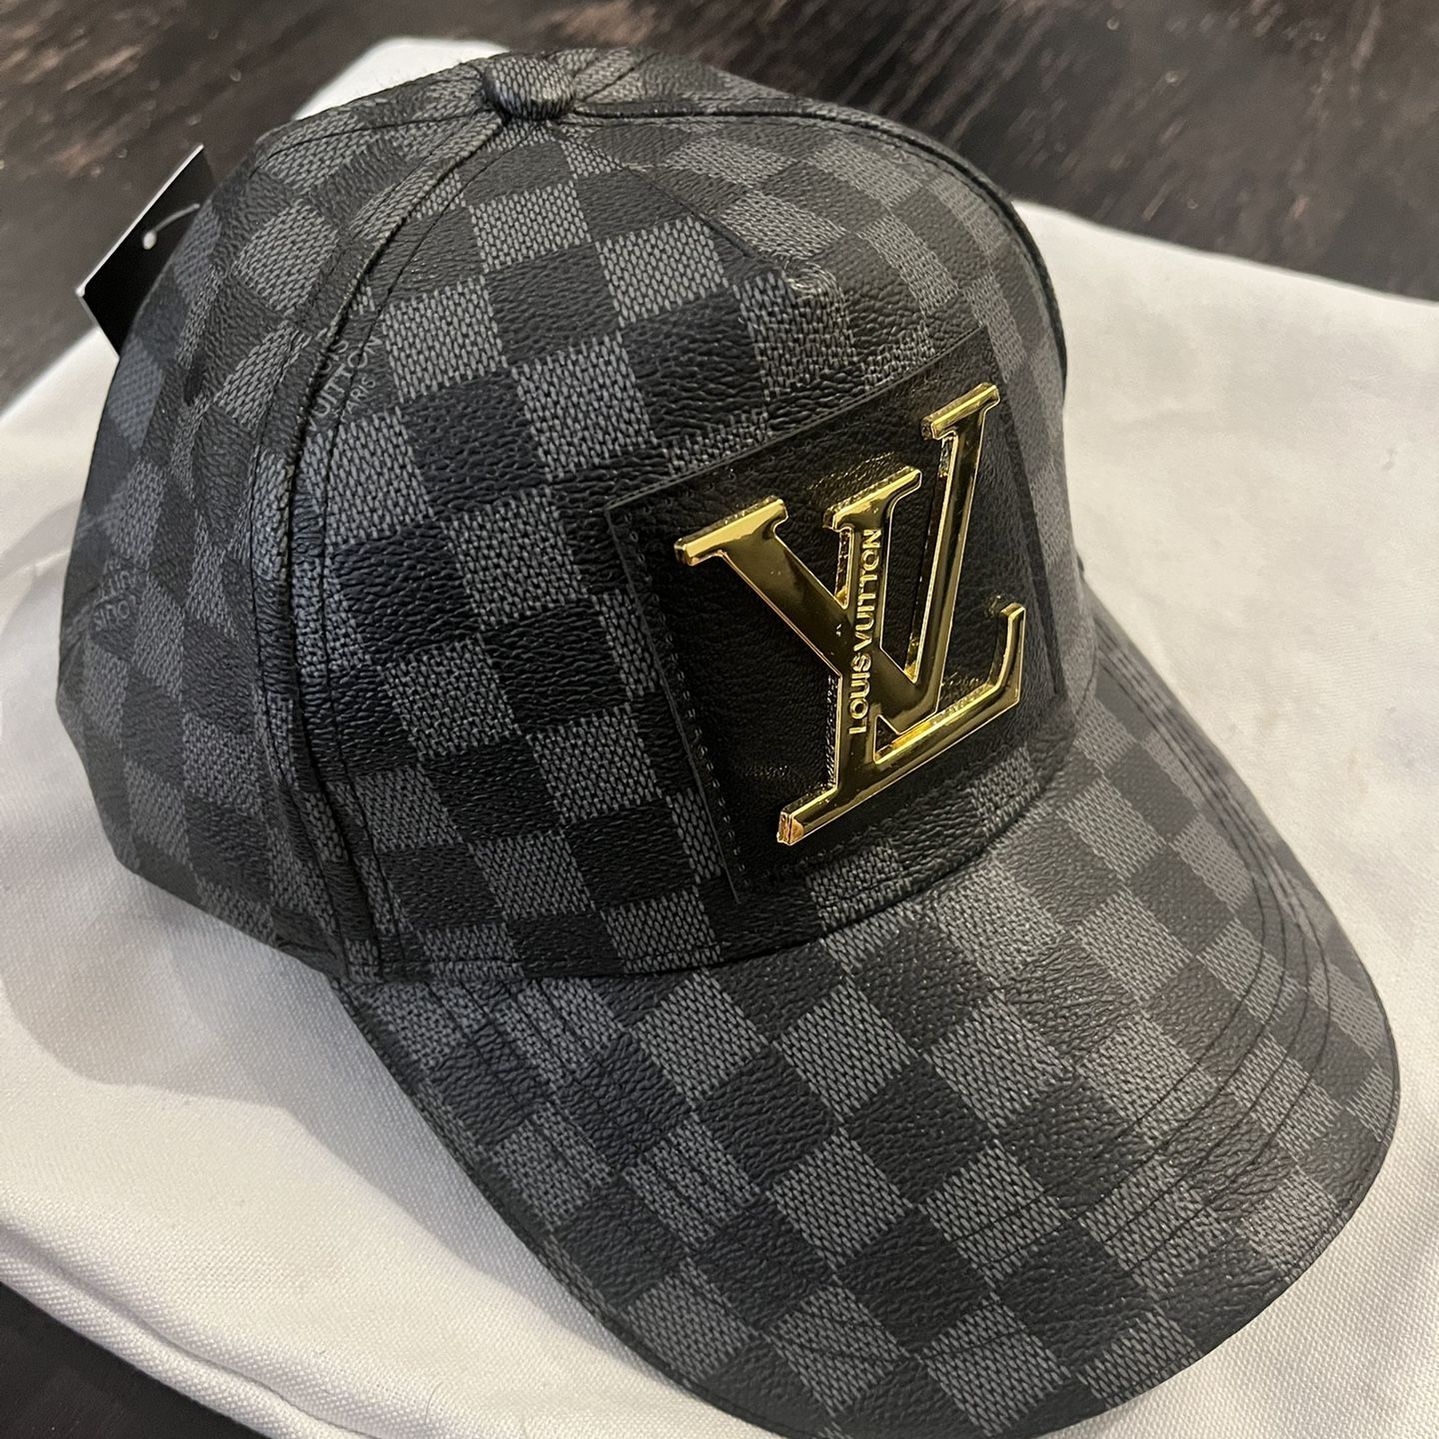 Black Lv Hat for Sale in Milwaukee, WI - OfferUp